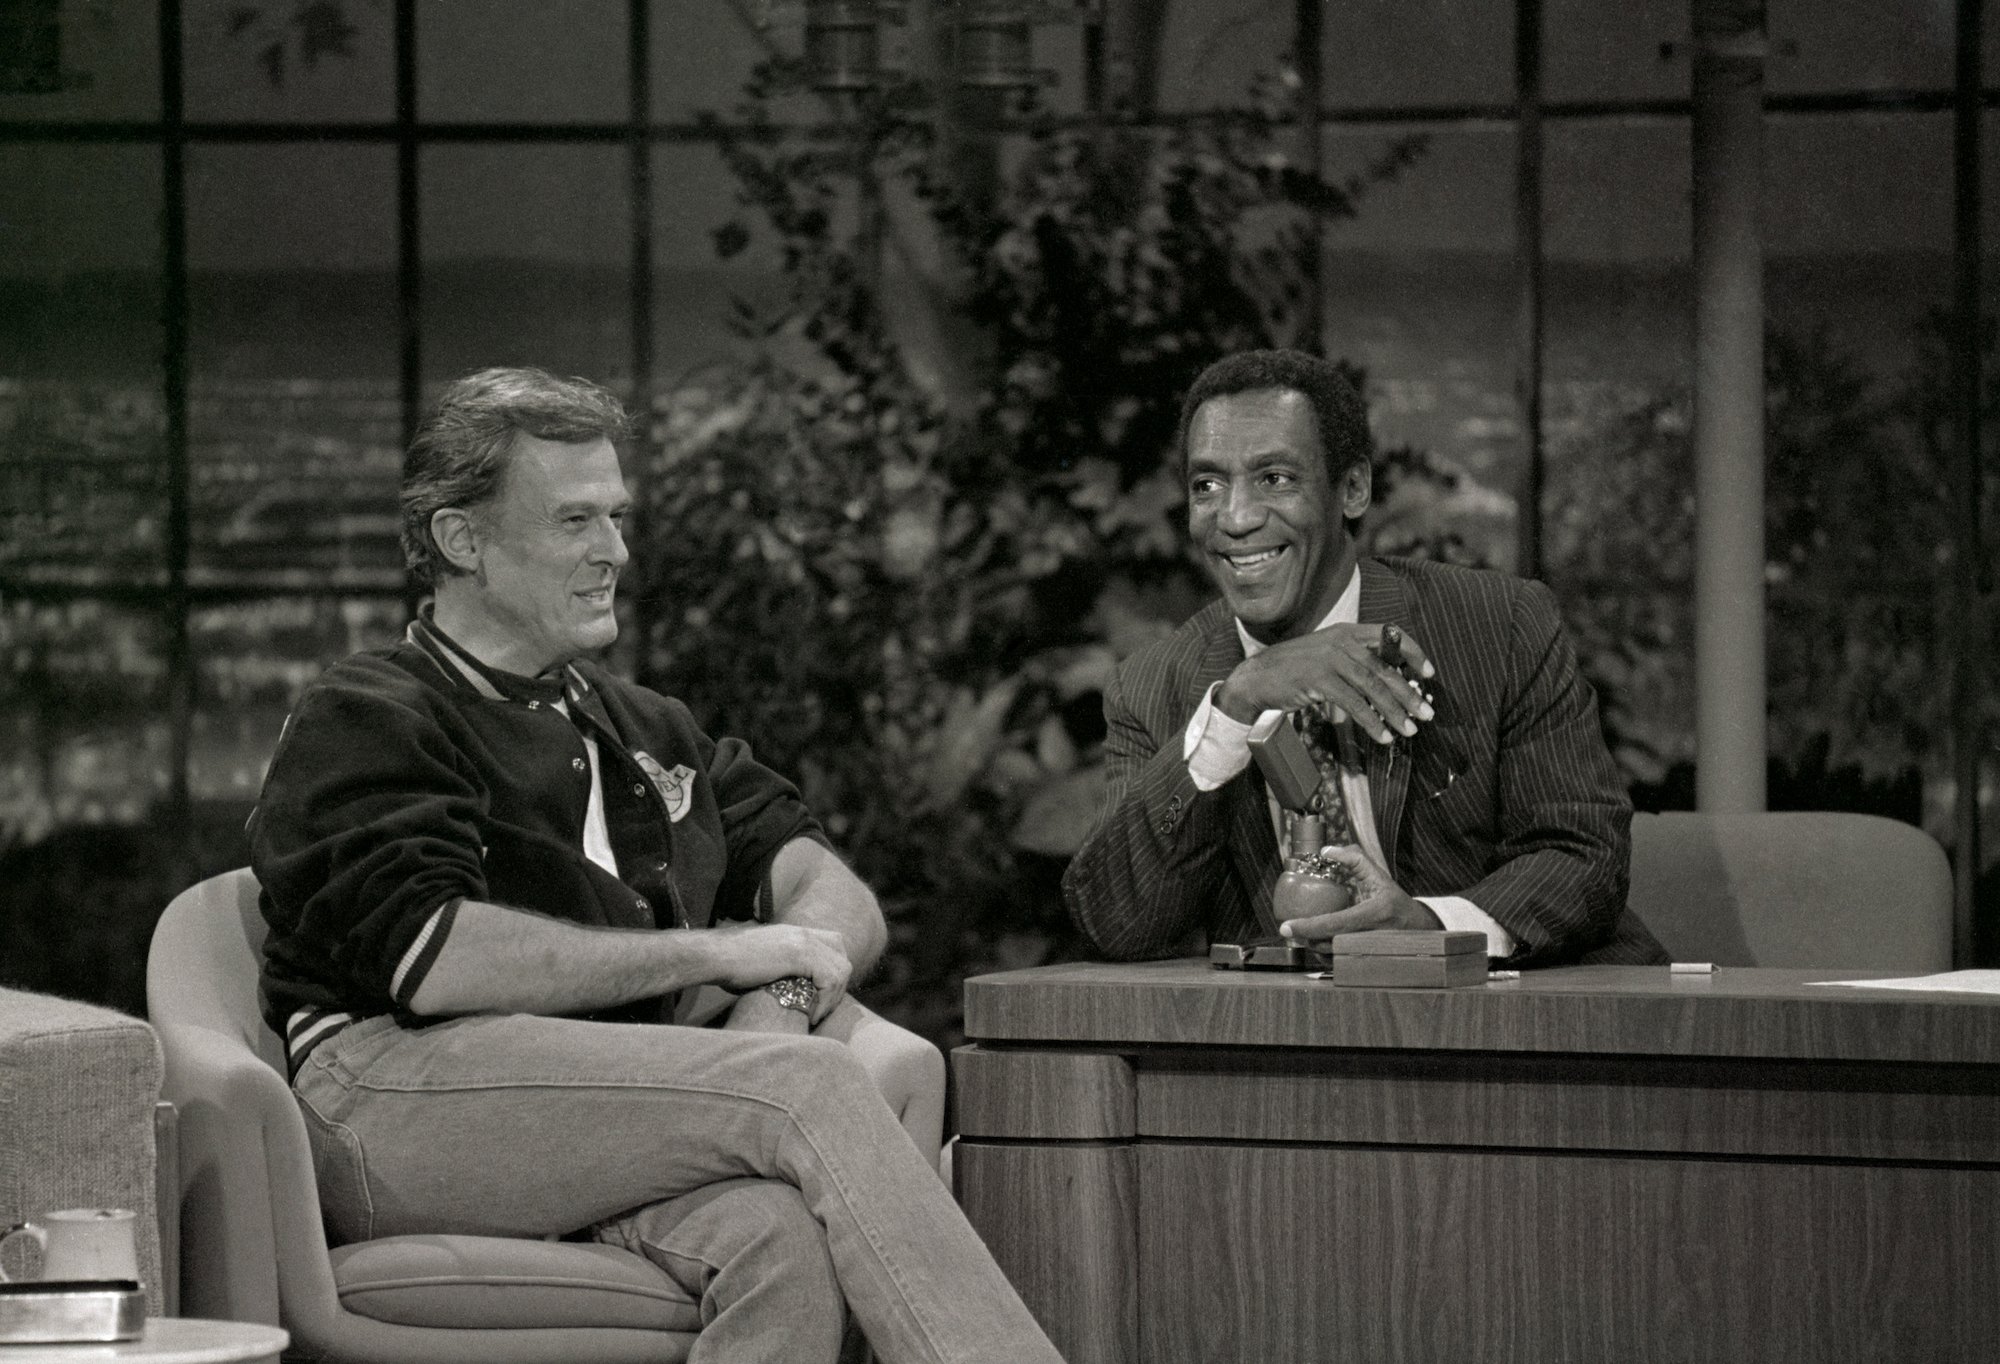 (L-R) Robert Culp and Bill Cosby on 'The Tonight Show', in black and white